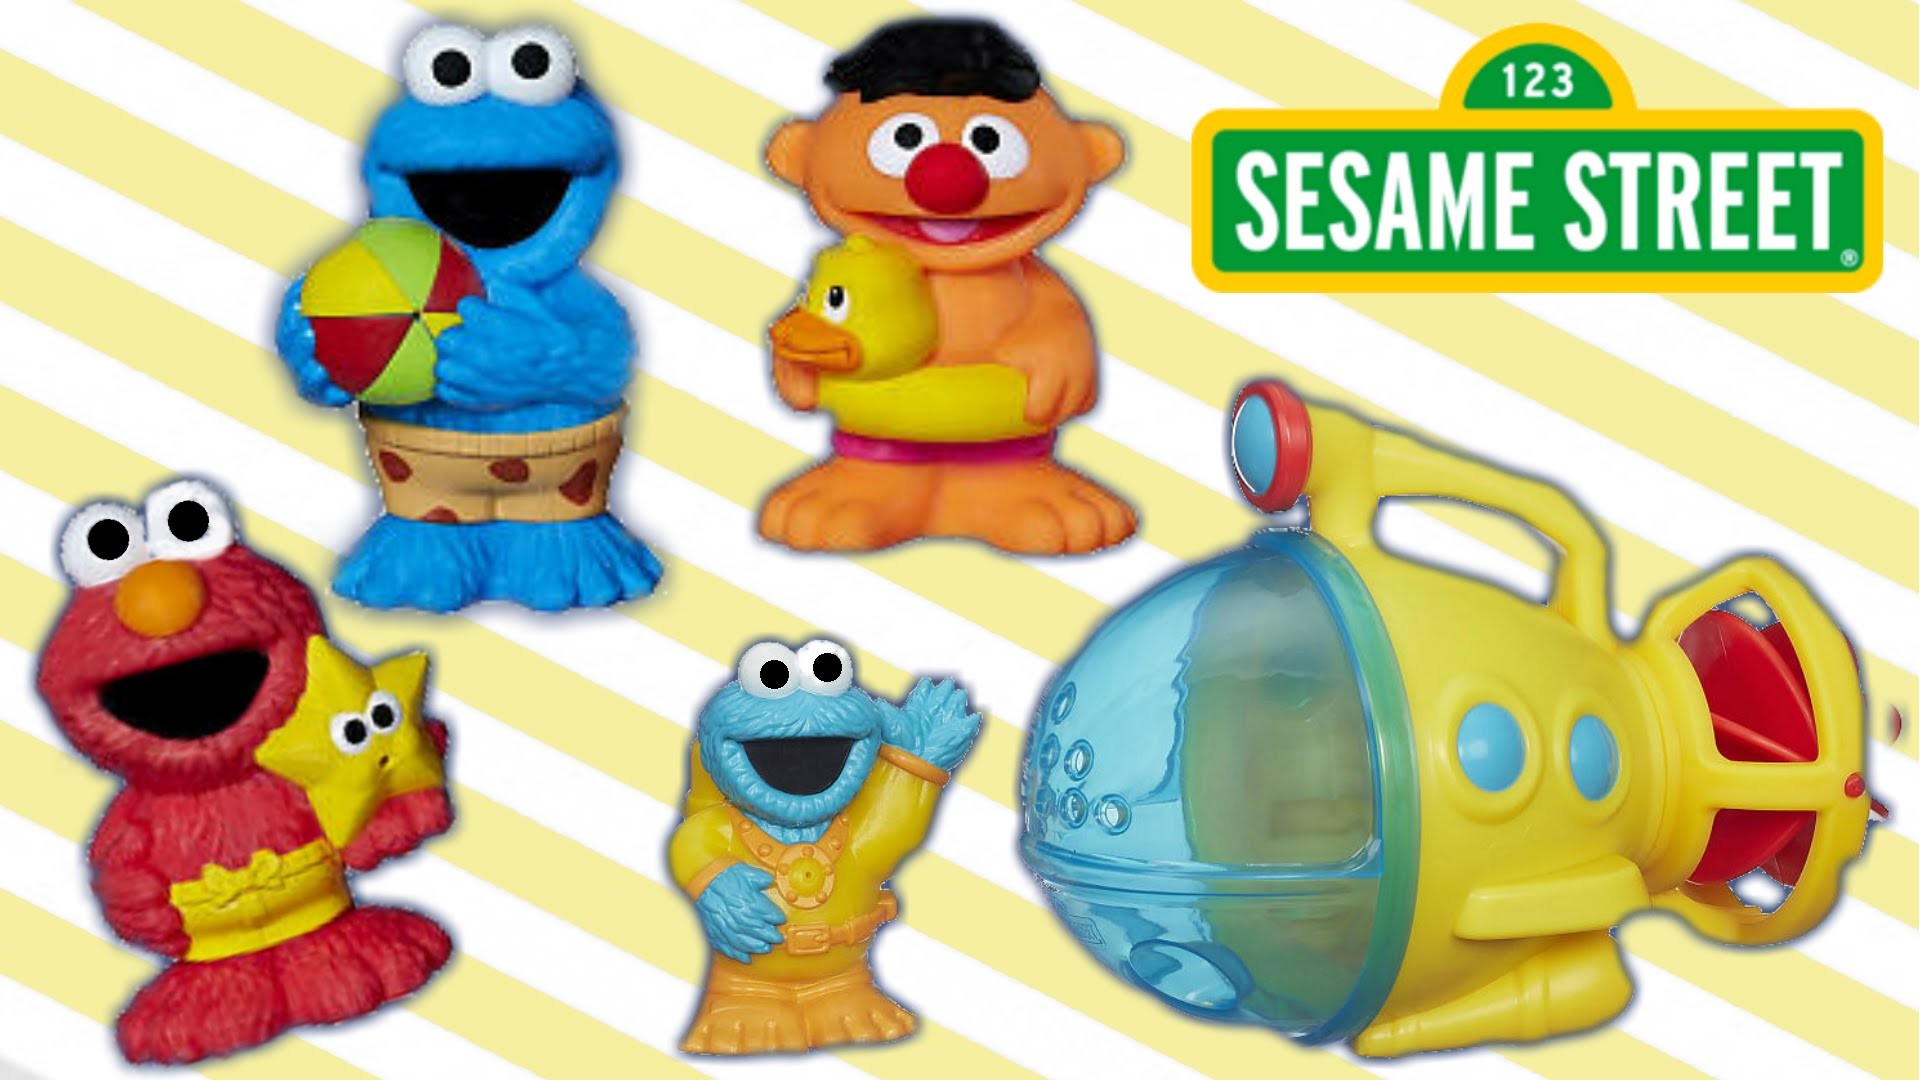 1920x1080 Bath time fun with Ernie, Elmo and Cookie Monster in his submarin...